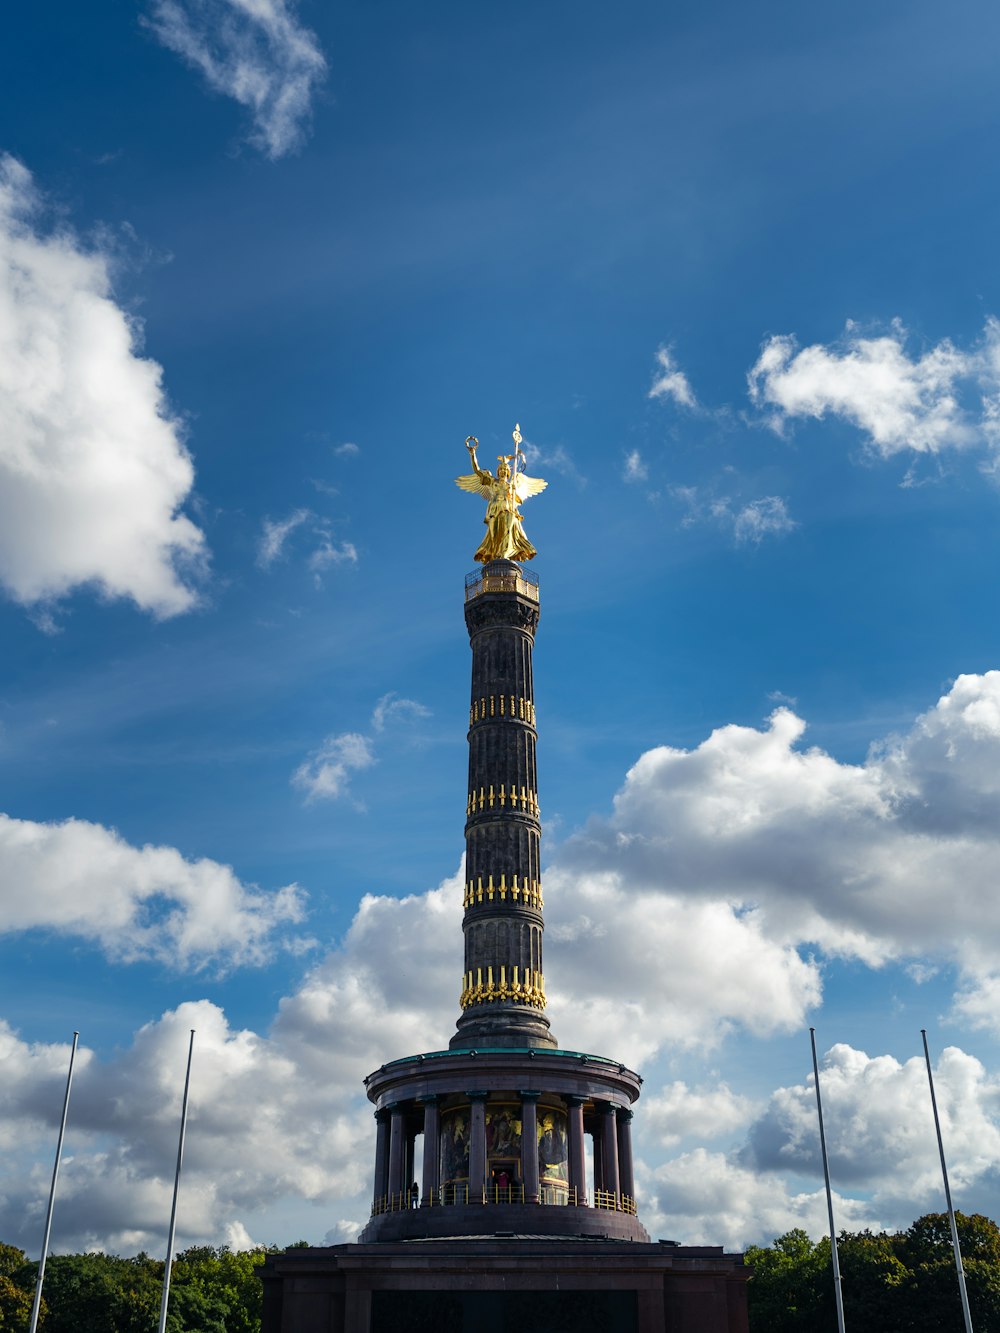 a tall tower with a golden statue on top of it